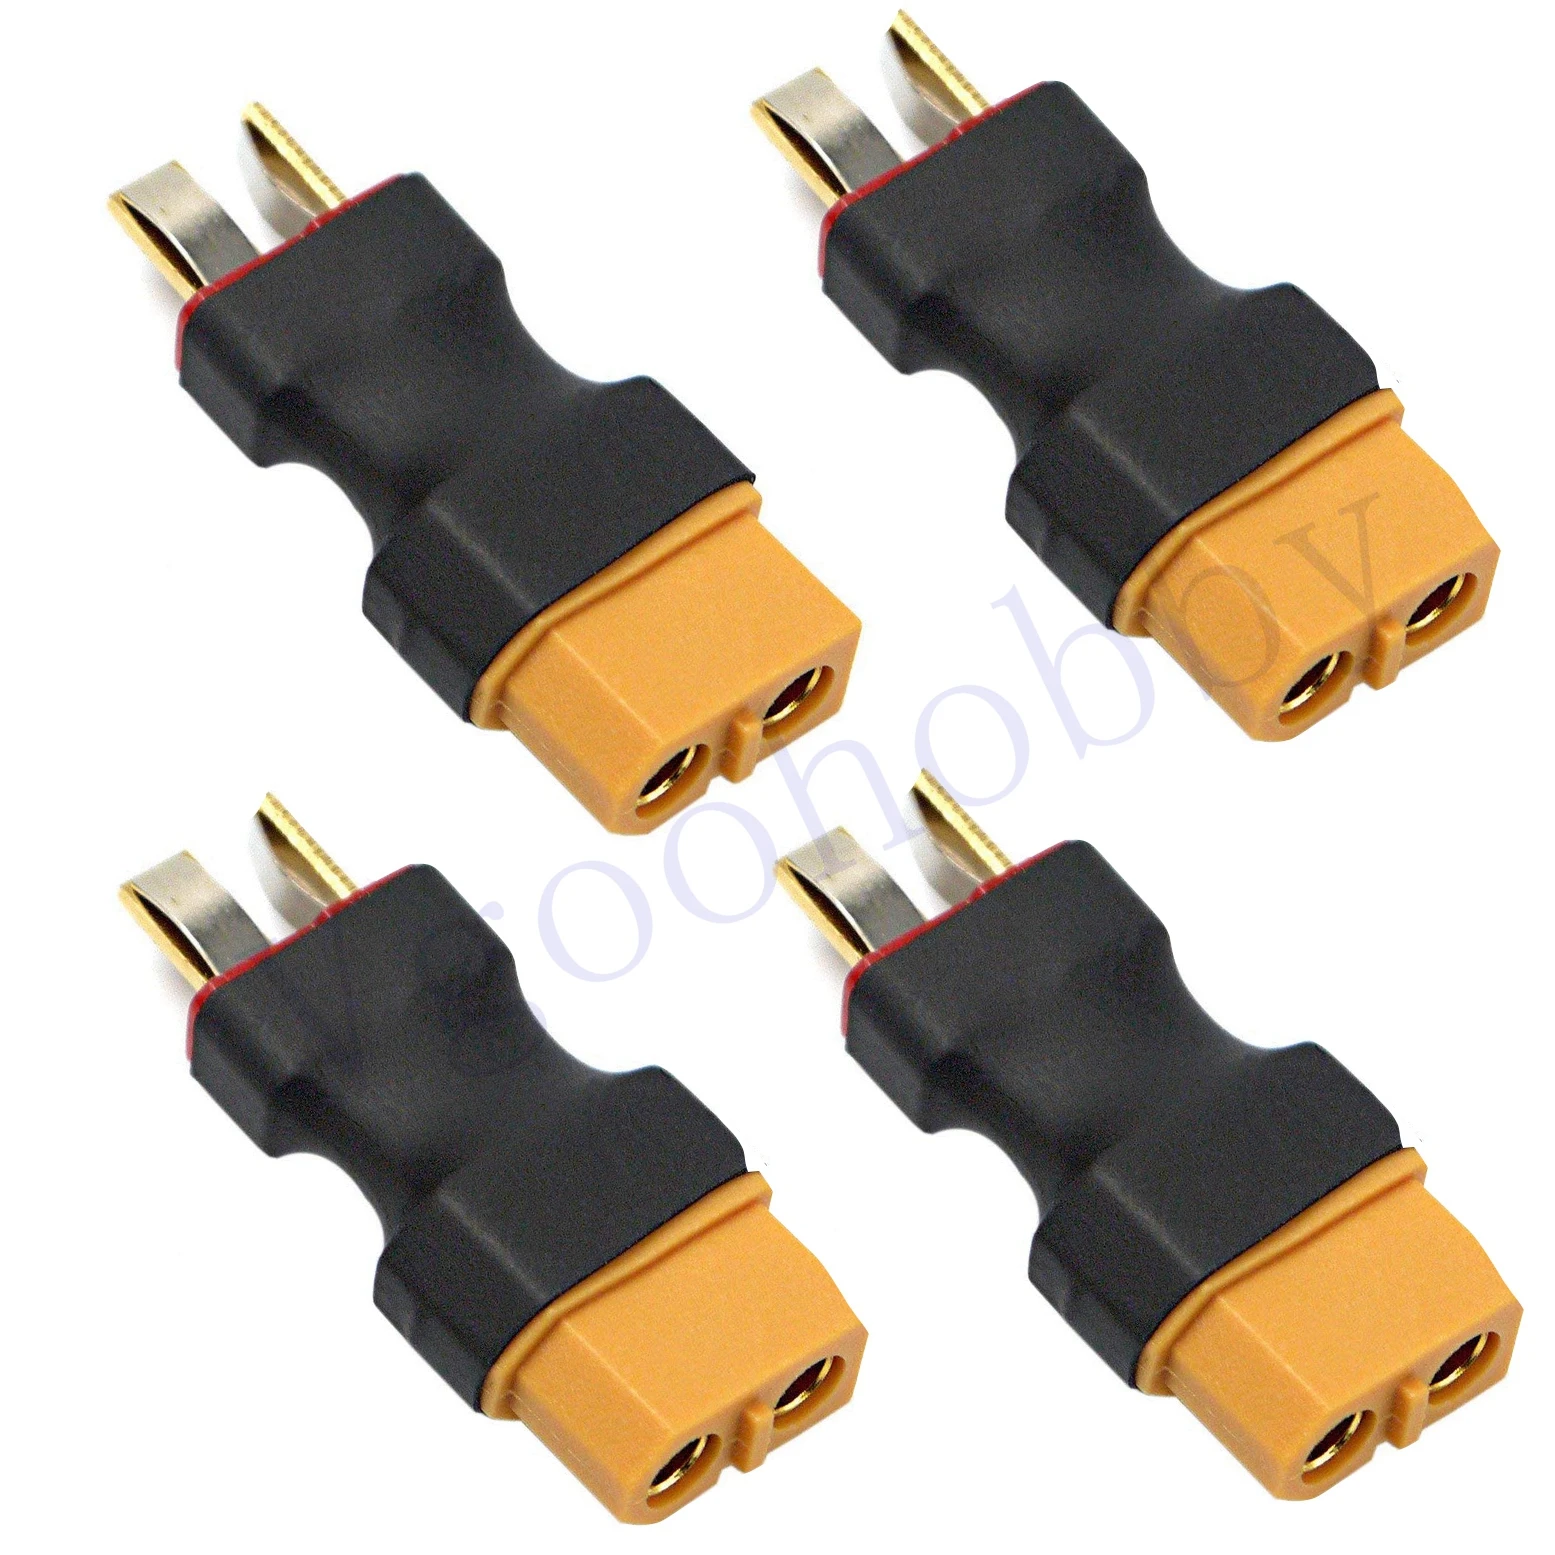 

4PCS XT60 Female to Male Deans T plug Connector Adapter No Wires Wireless RC LiPo NiMH Battery ESC Connector Adapters